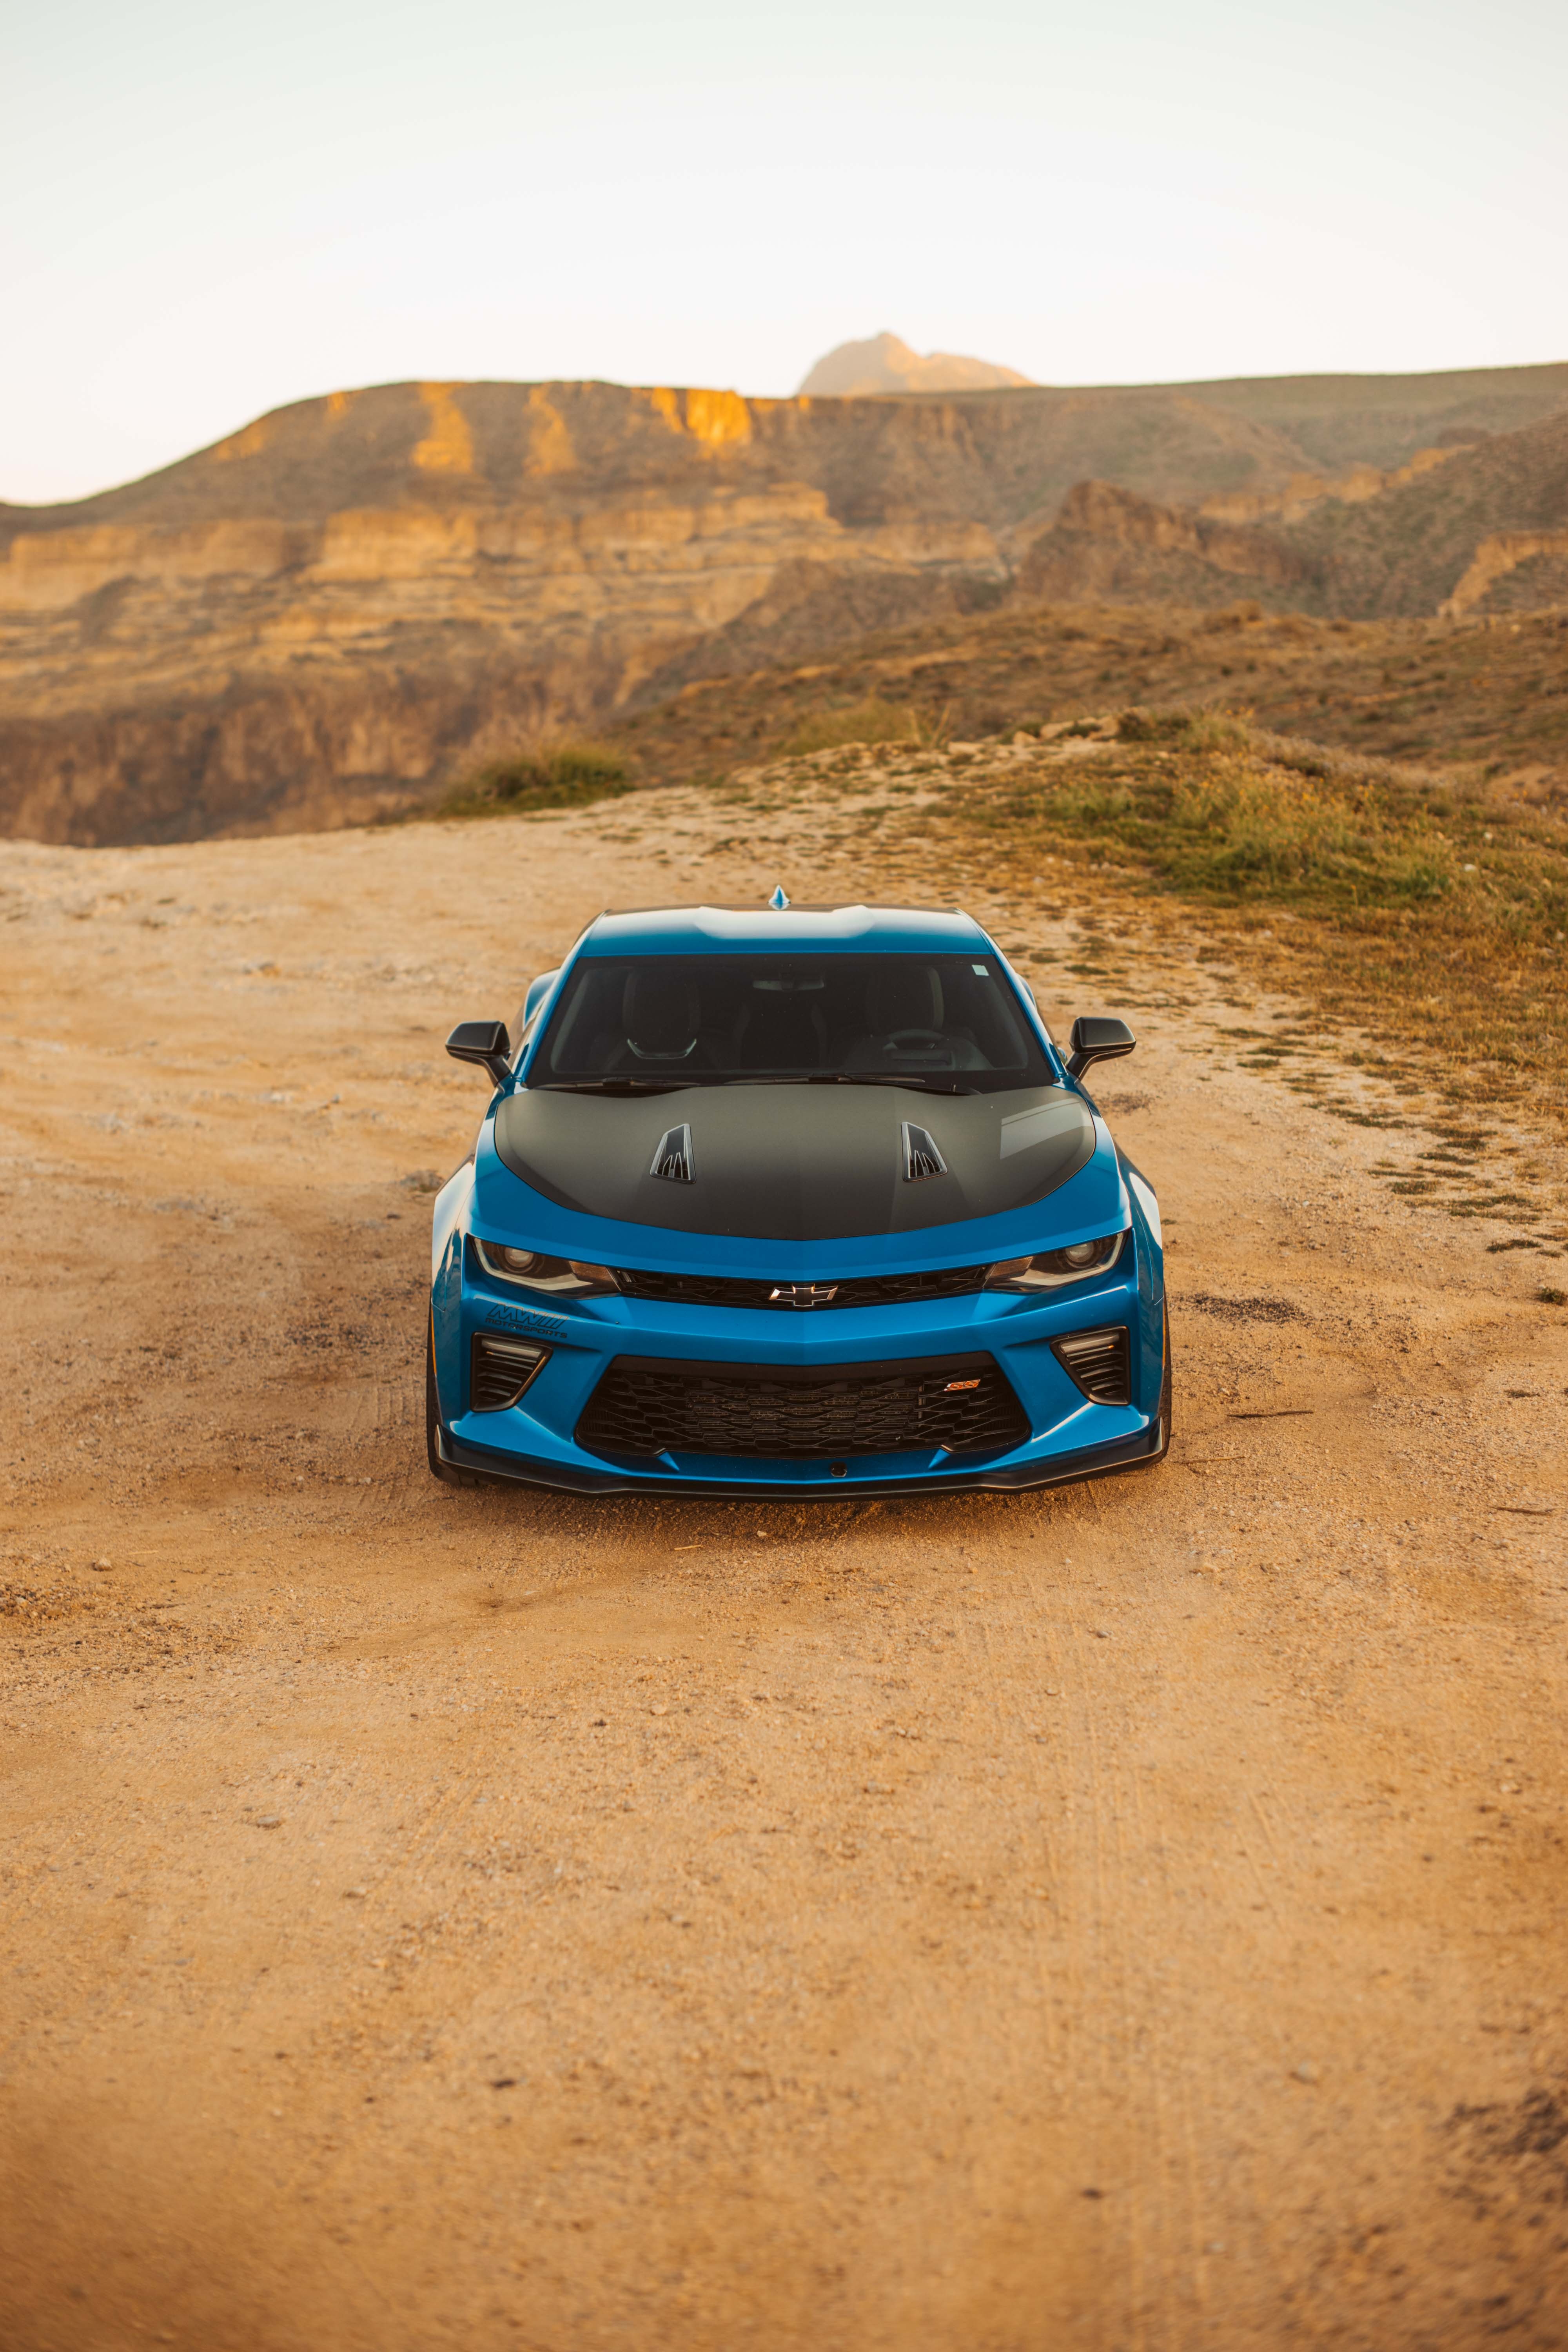 front view, chevrolet, tuning, cars, car Full HD